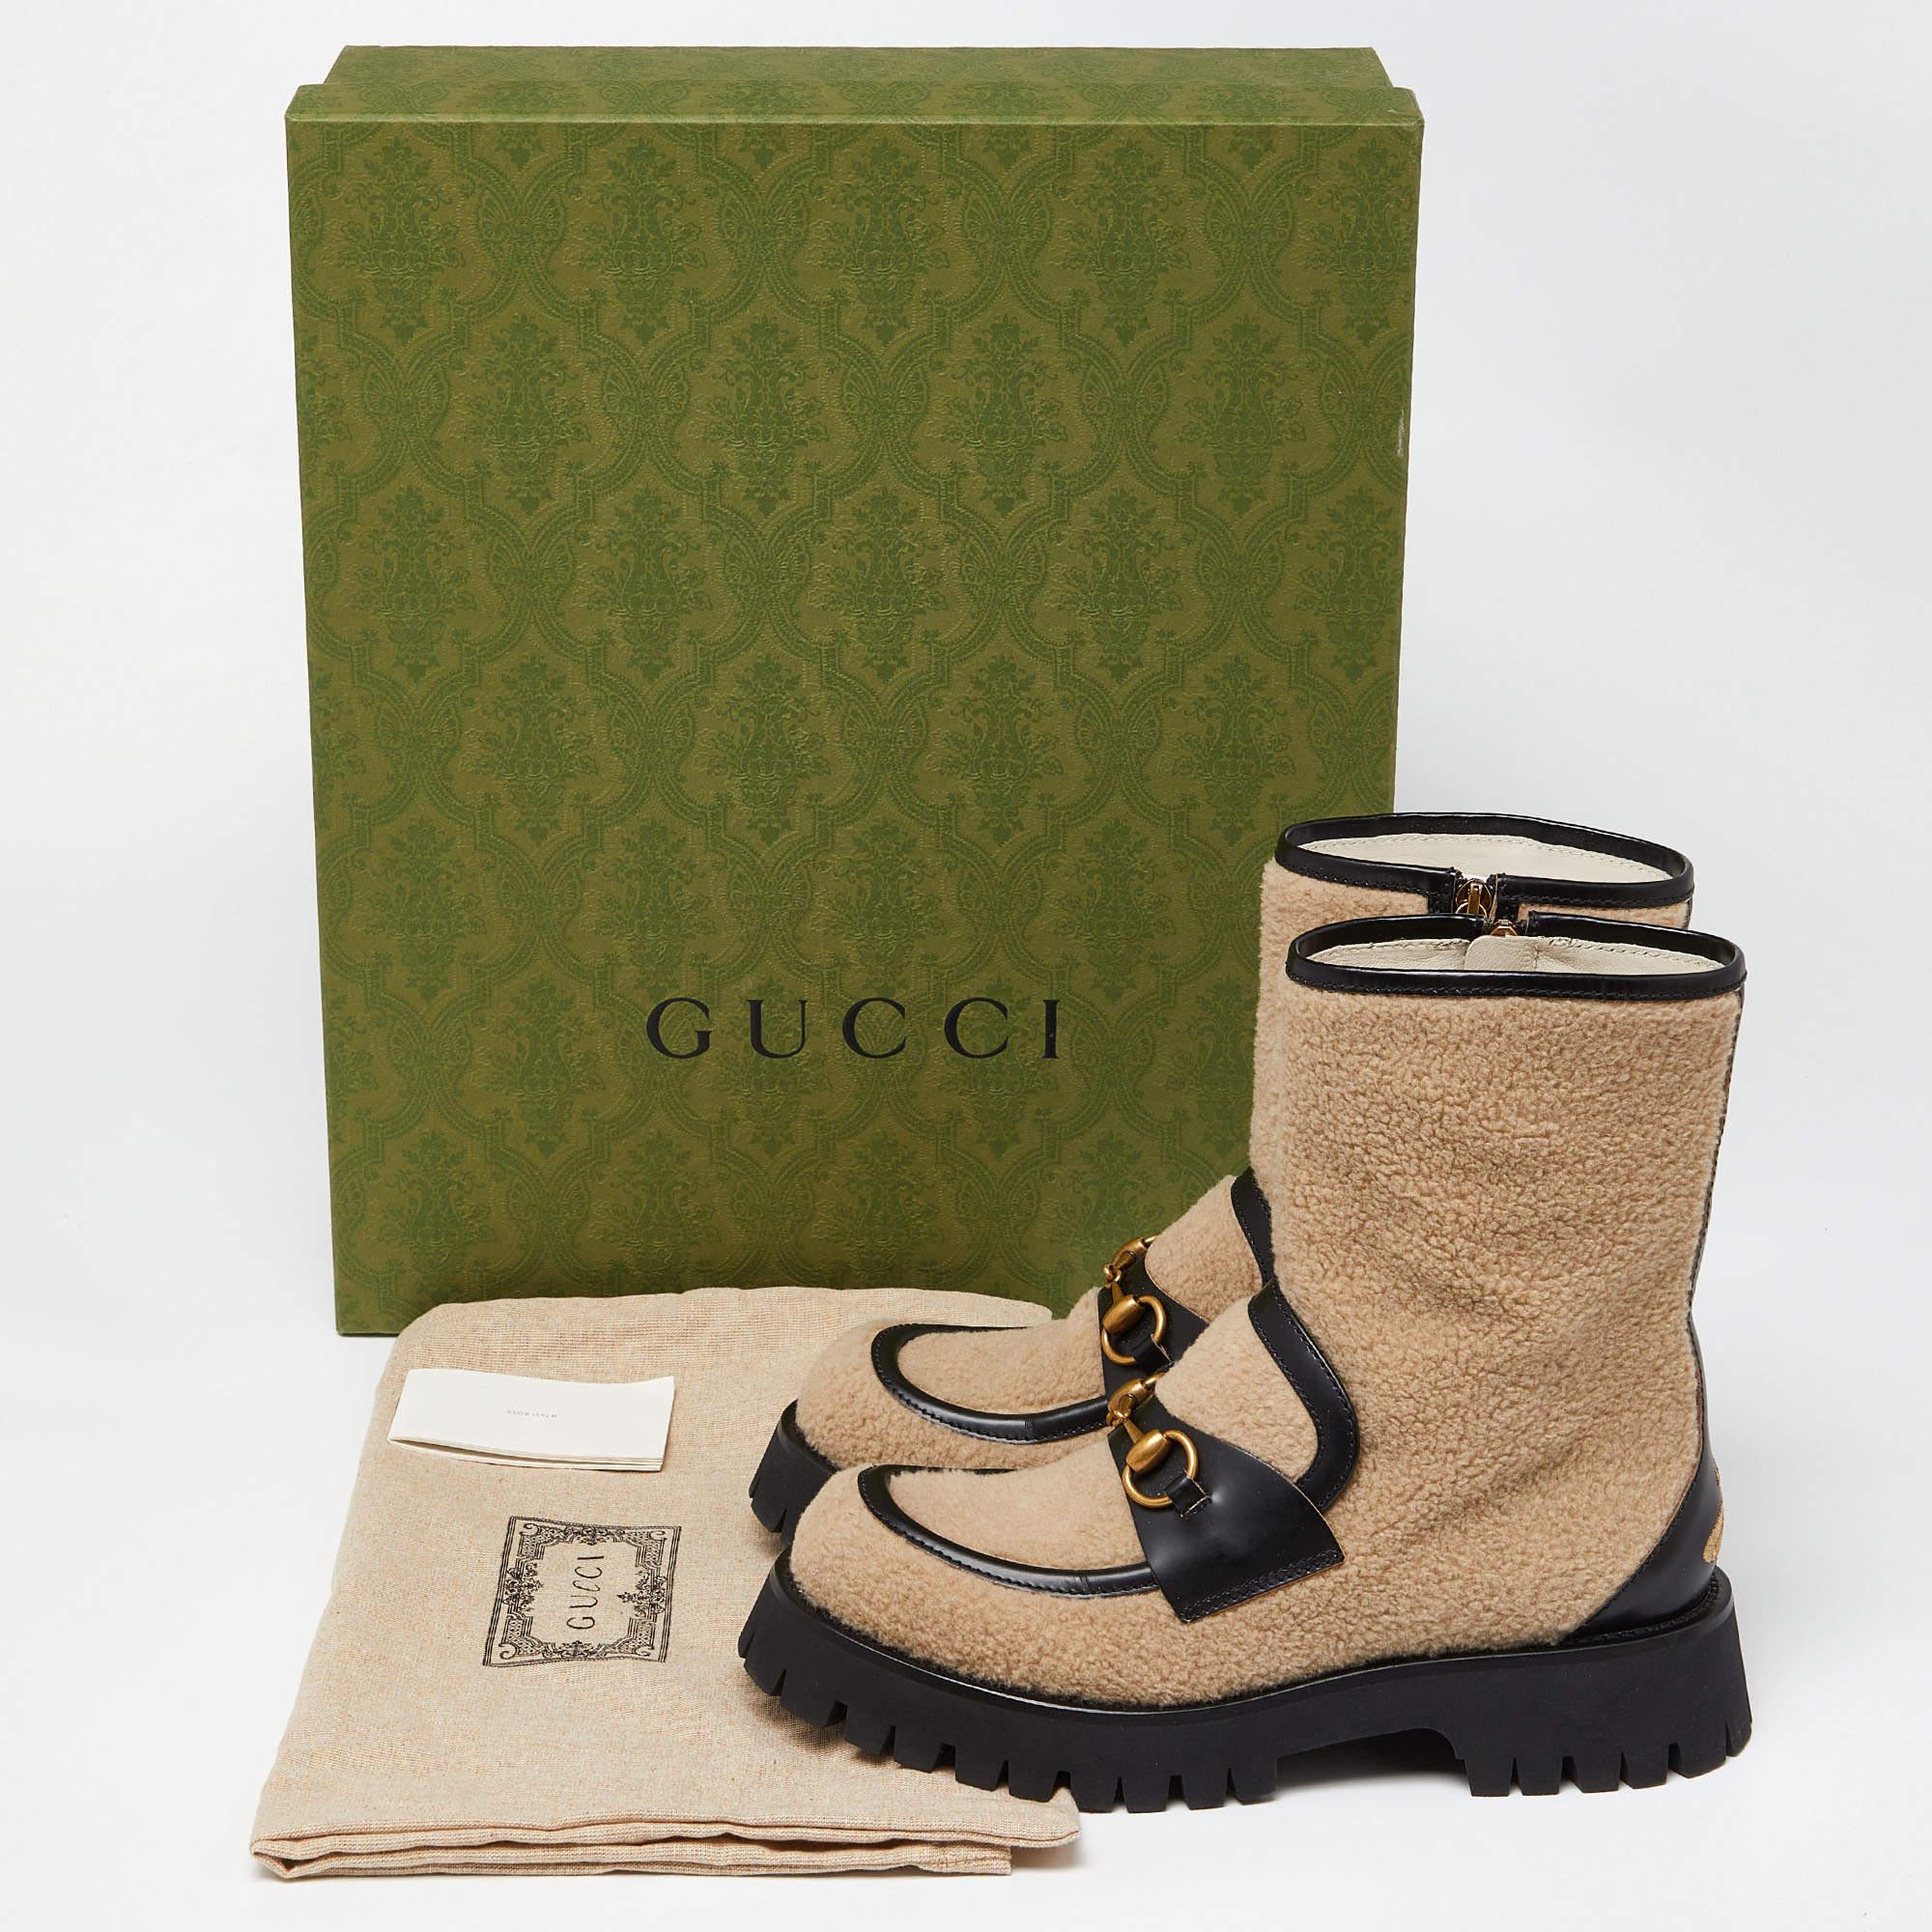 Gucci Beige/Black Wool and Leather Bee Embroidered Horsebit Ankle Boots Size 39 7